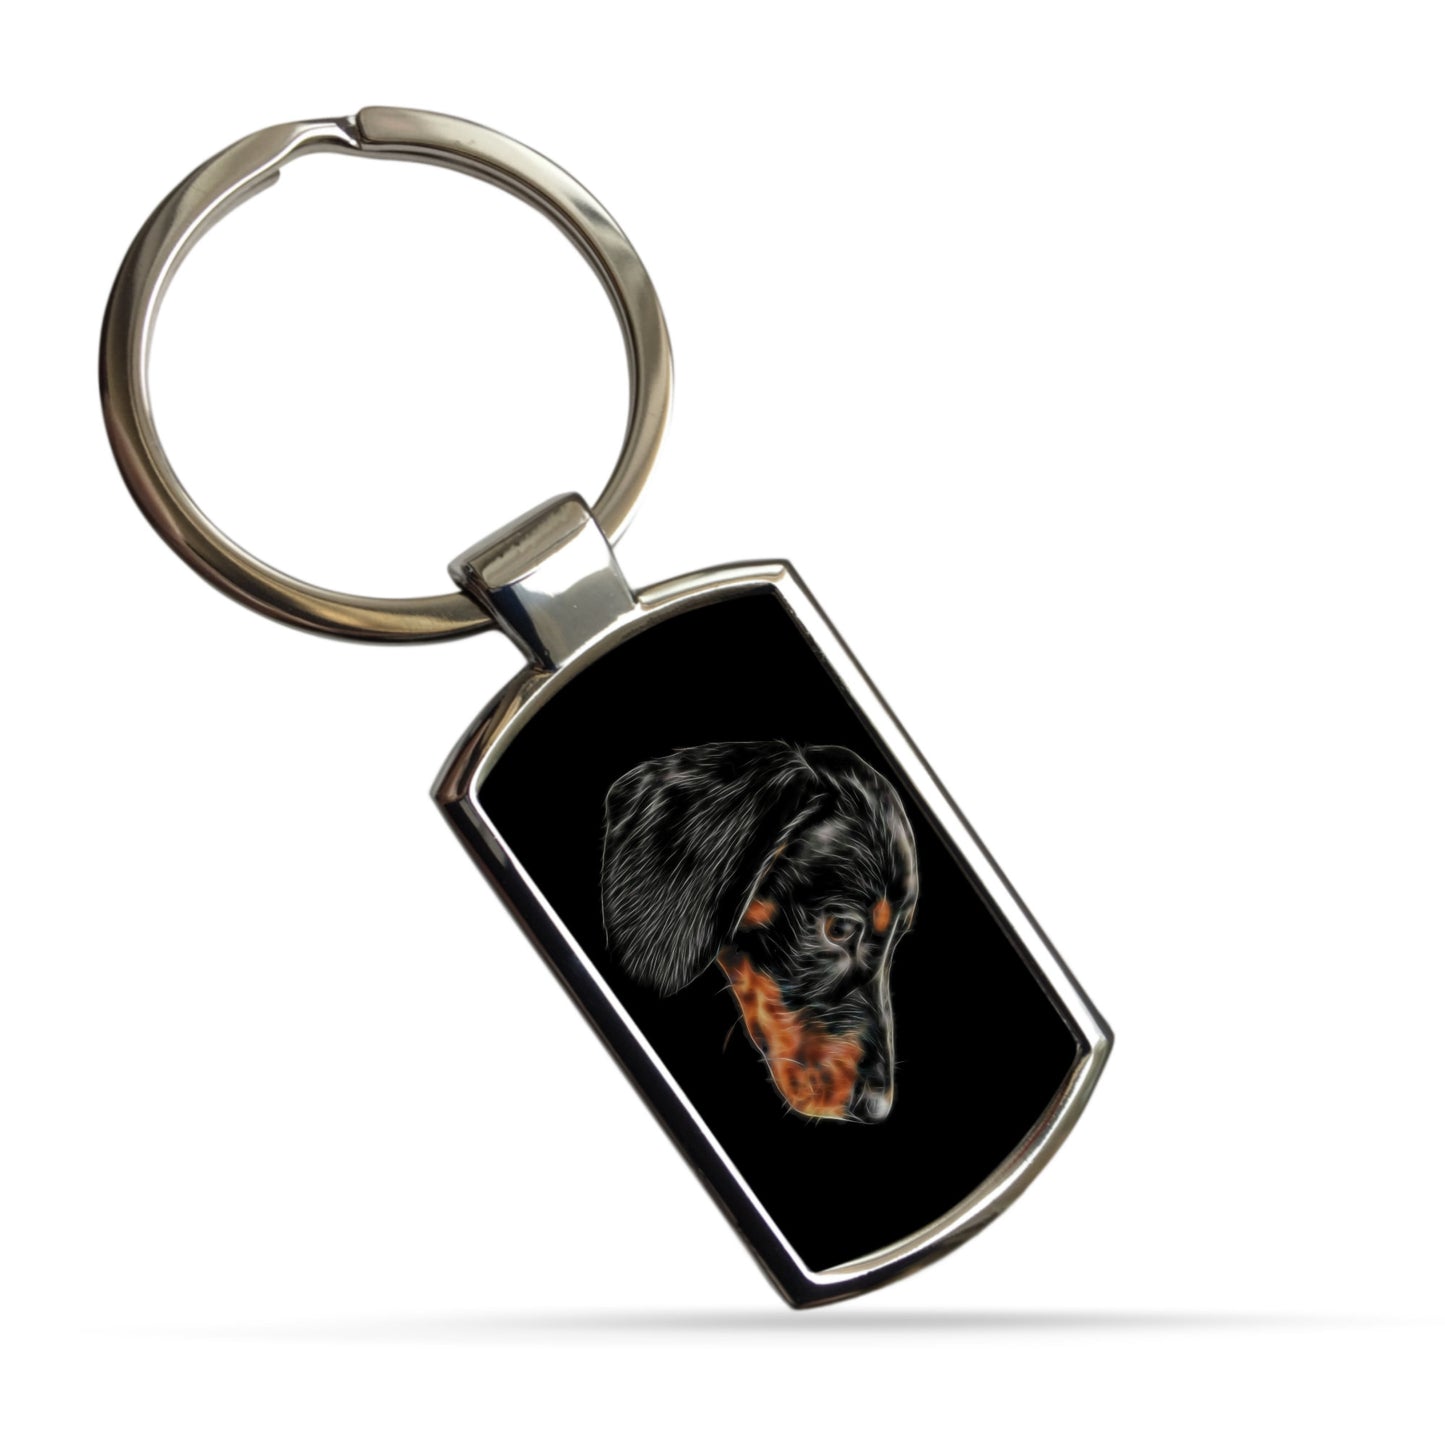 Dachshund Keychain with Stunning Fractal Art Design. Black and Tan or Chocolate